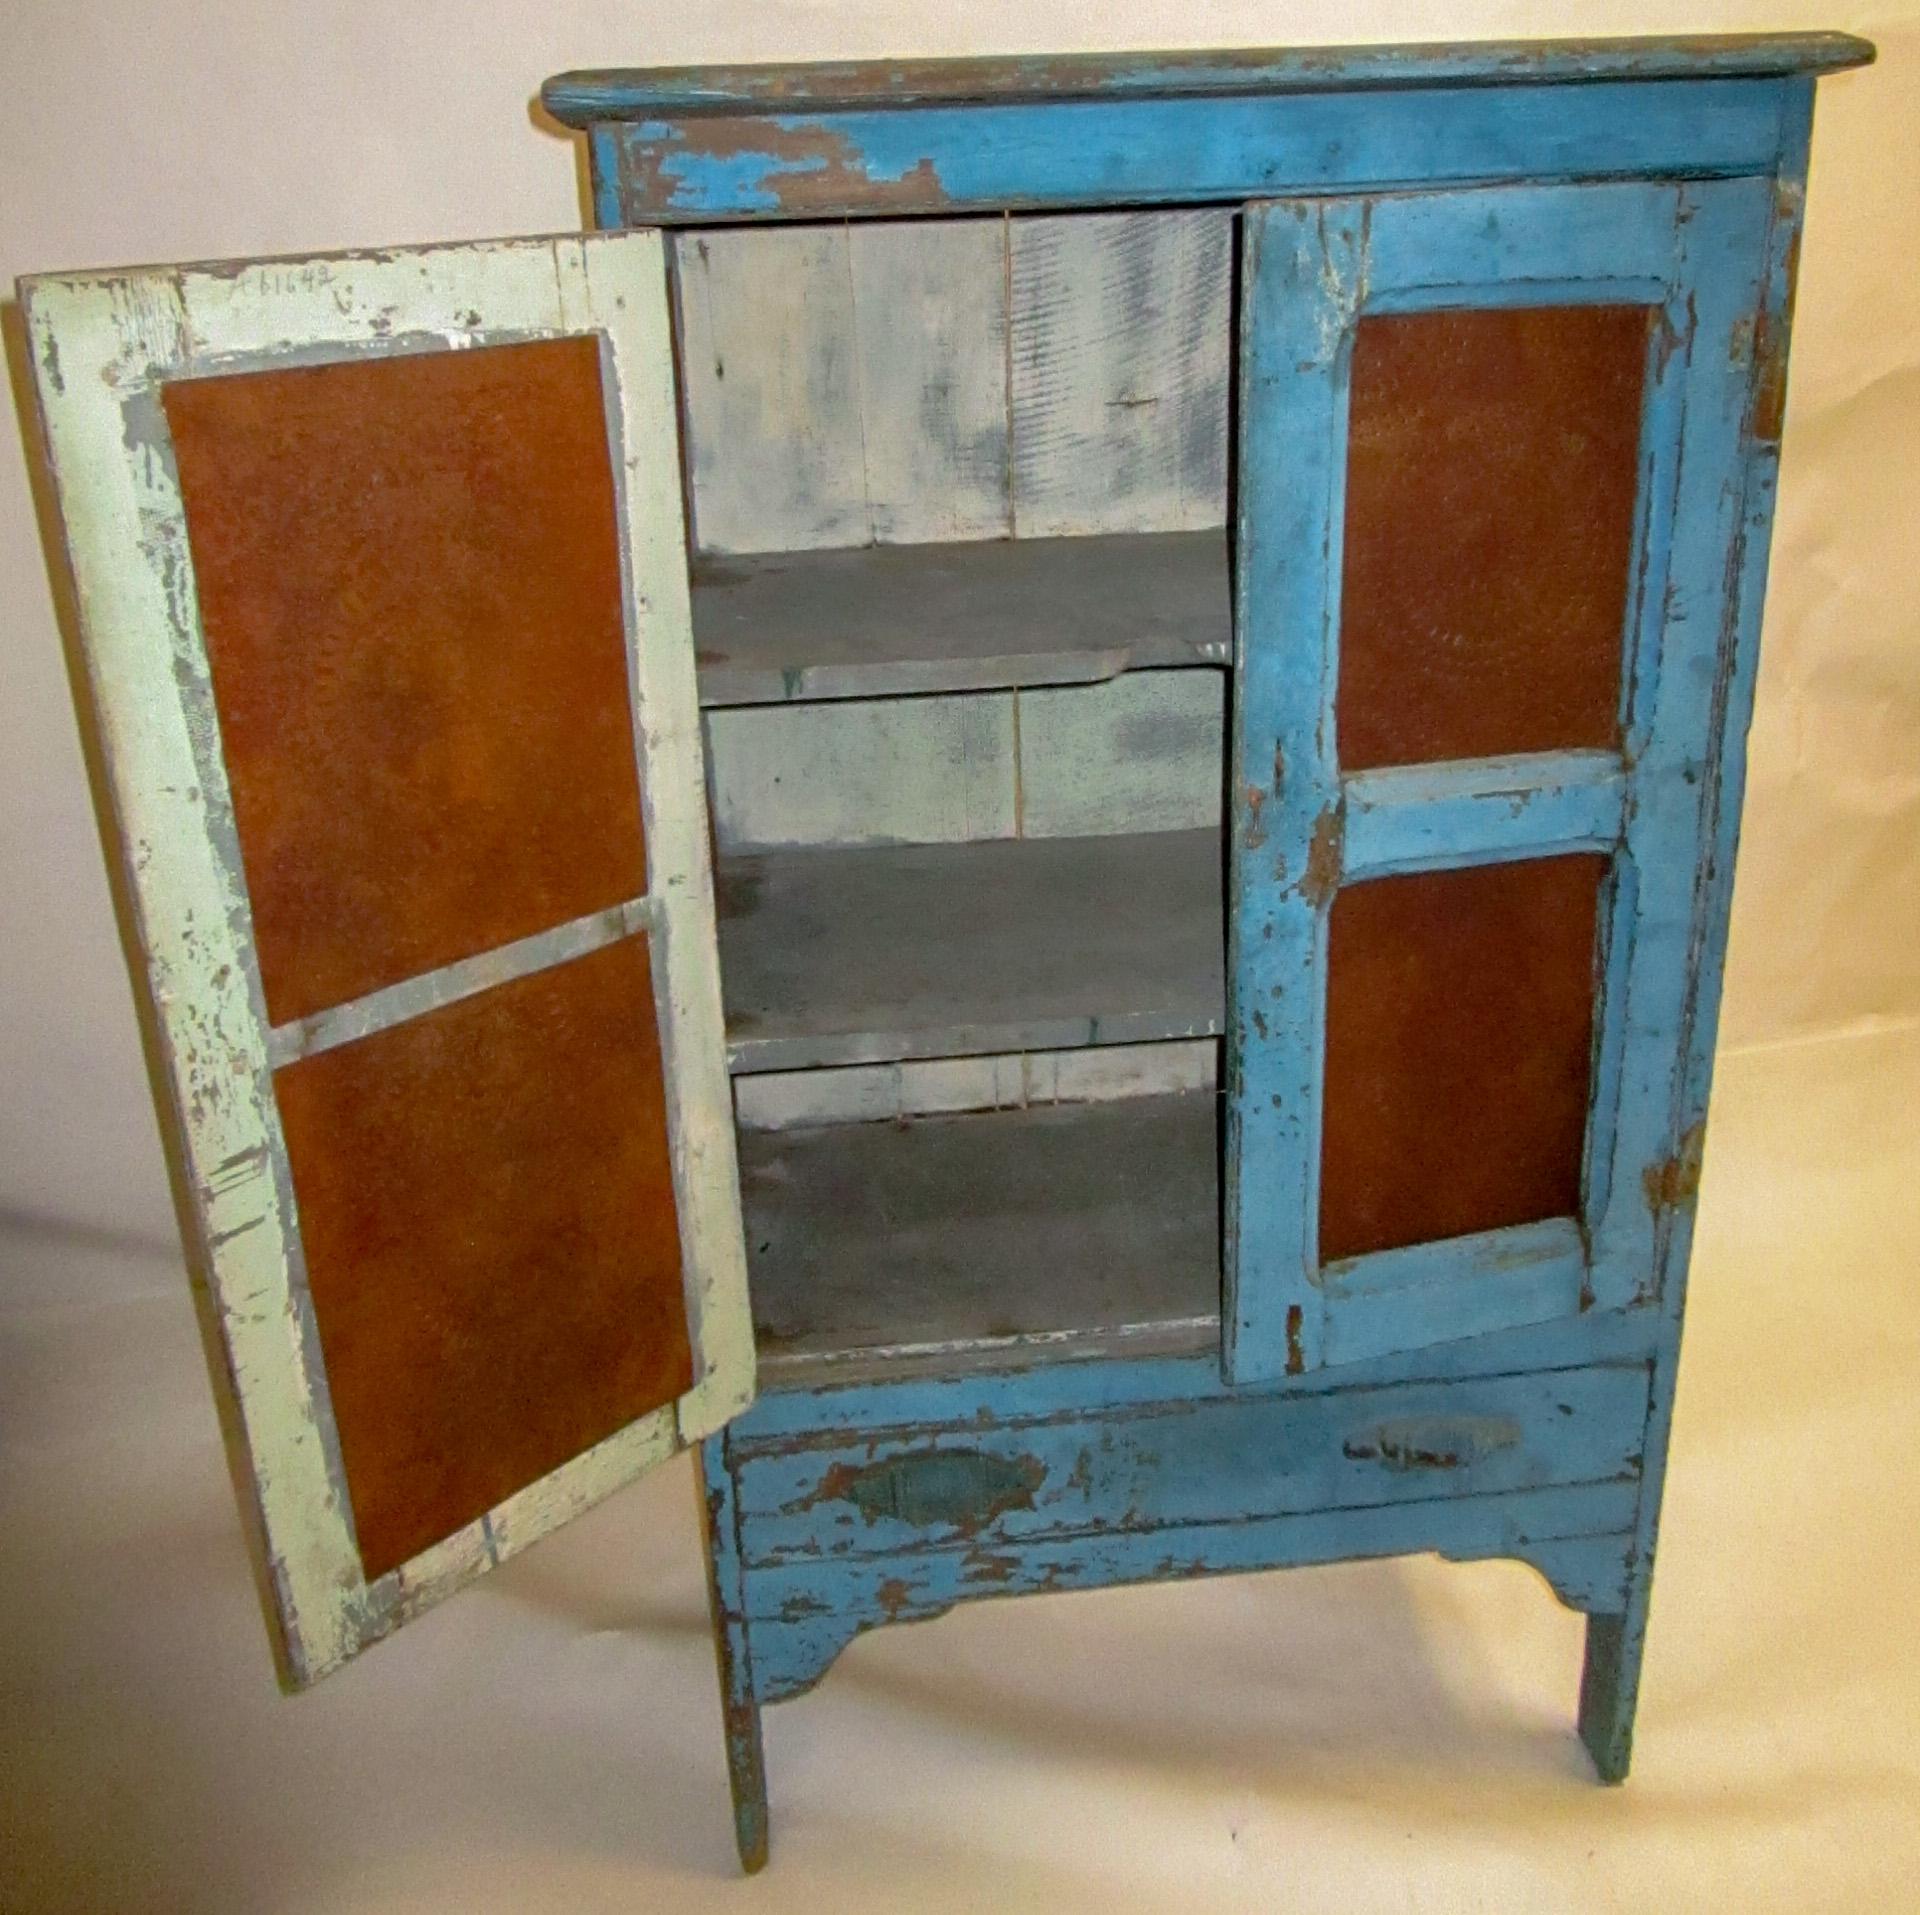 A truly American Southern piece, this rustic wooden pie safe features pierced tin inserts in the double doors and on the sides. Other features include two shelves, primitive hardware and wonderful old distressed blue paint. The nicks and scrapes and